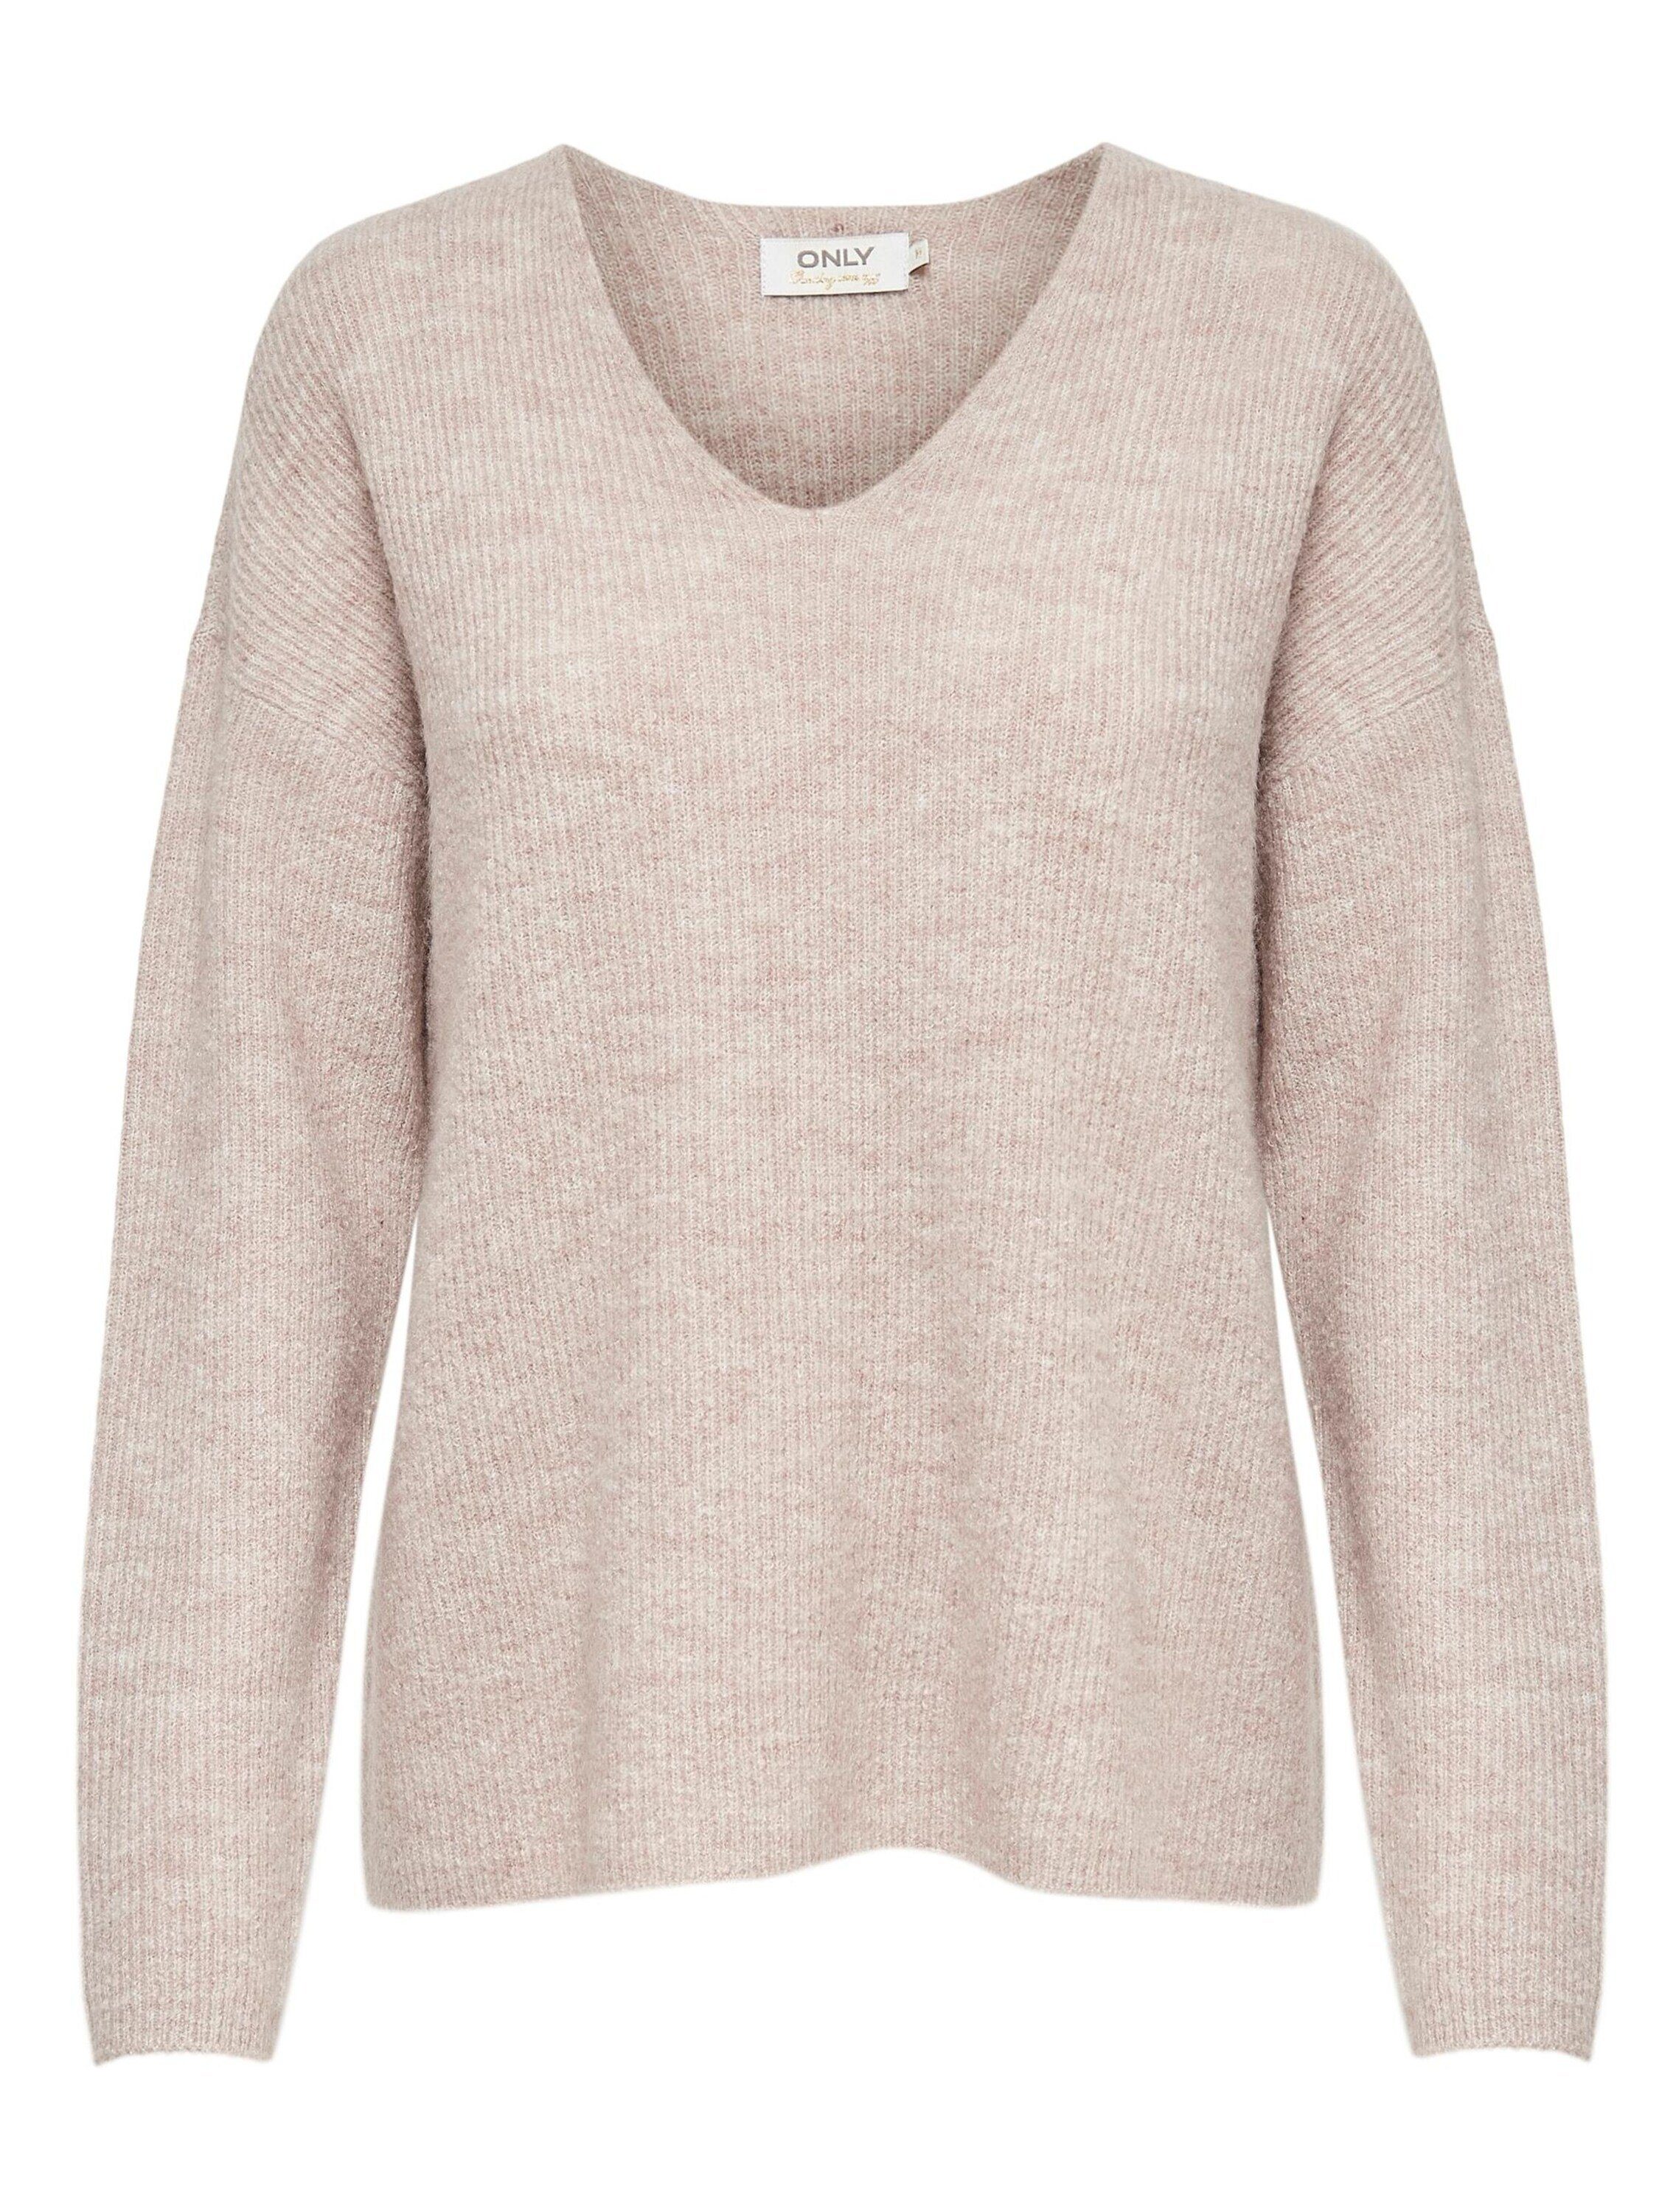 Details stone Strickpullover pumice Camilla (1-tlg) Plain/ohne ONLY